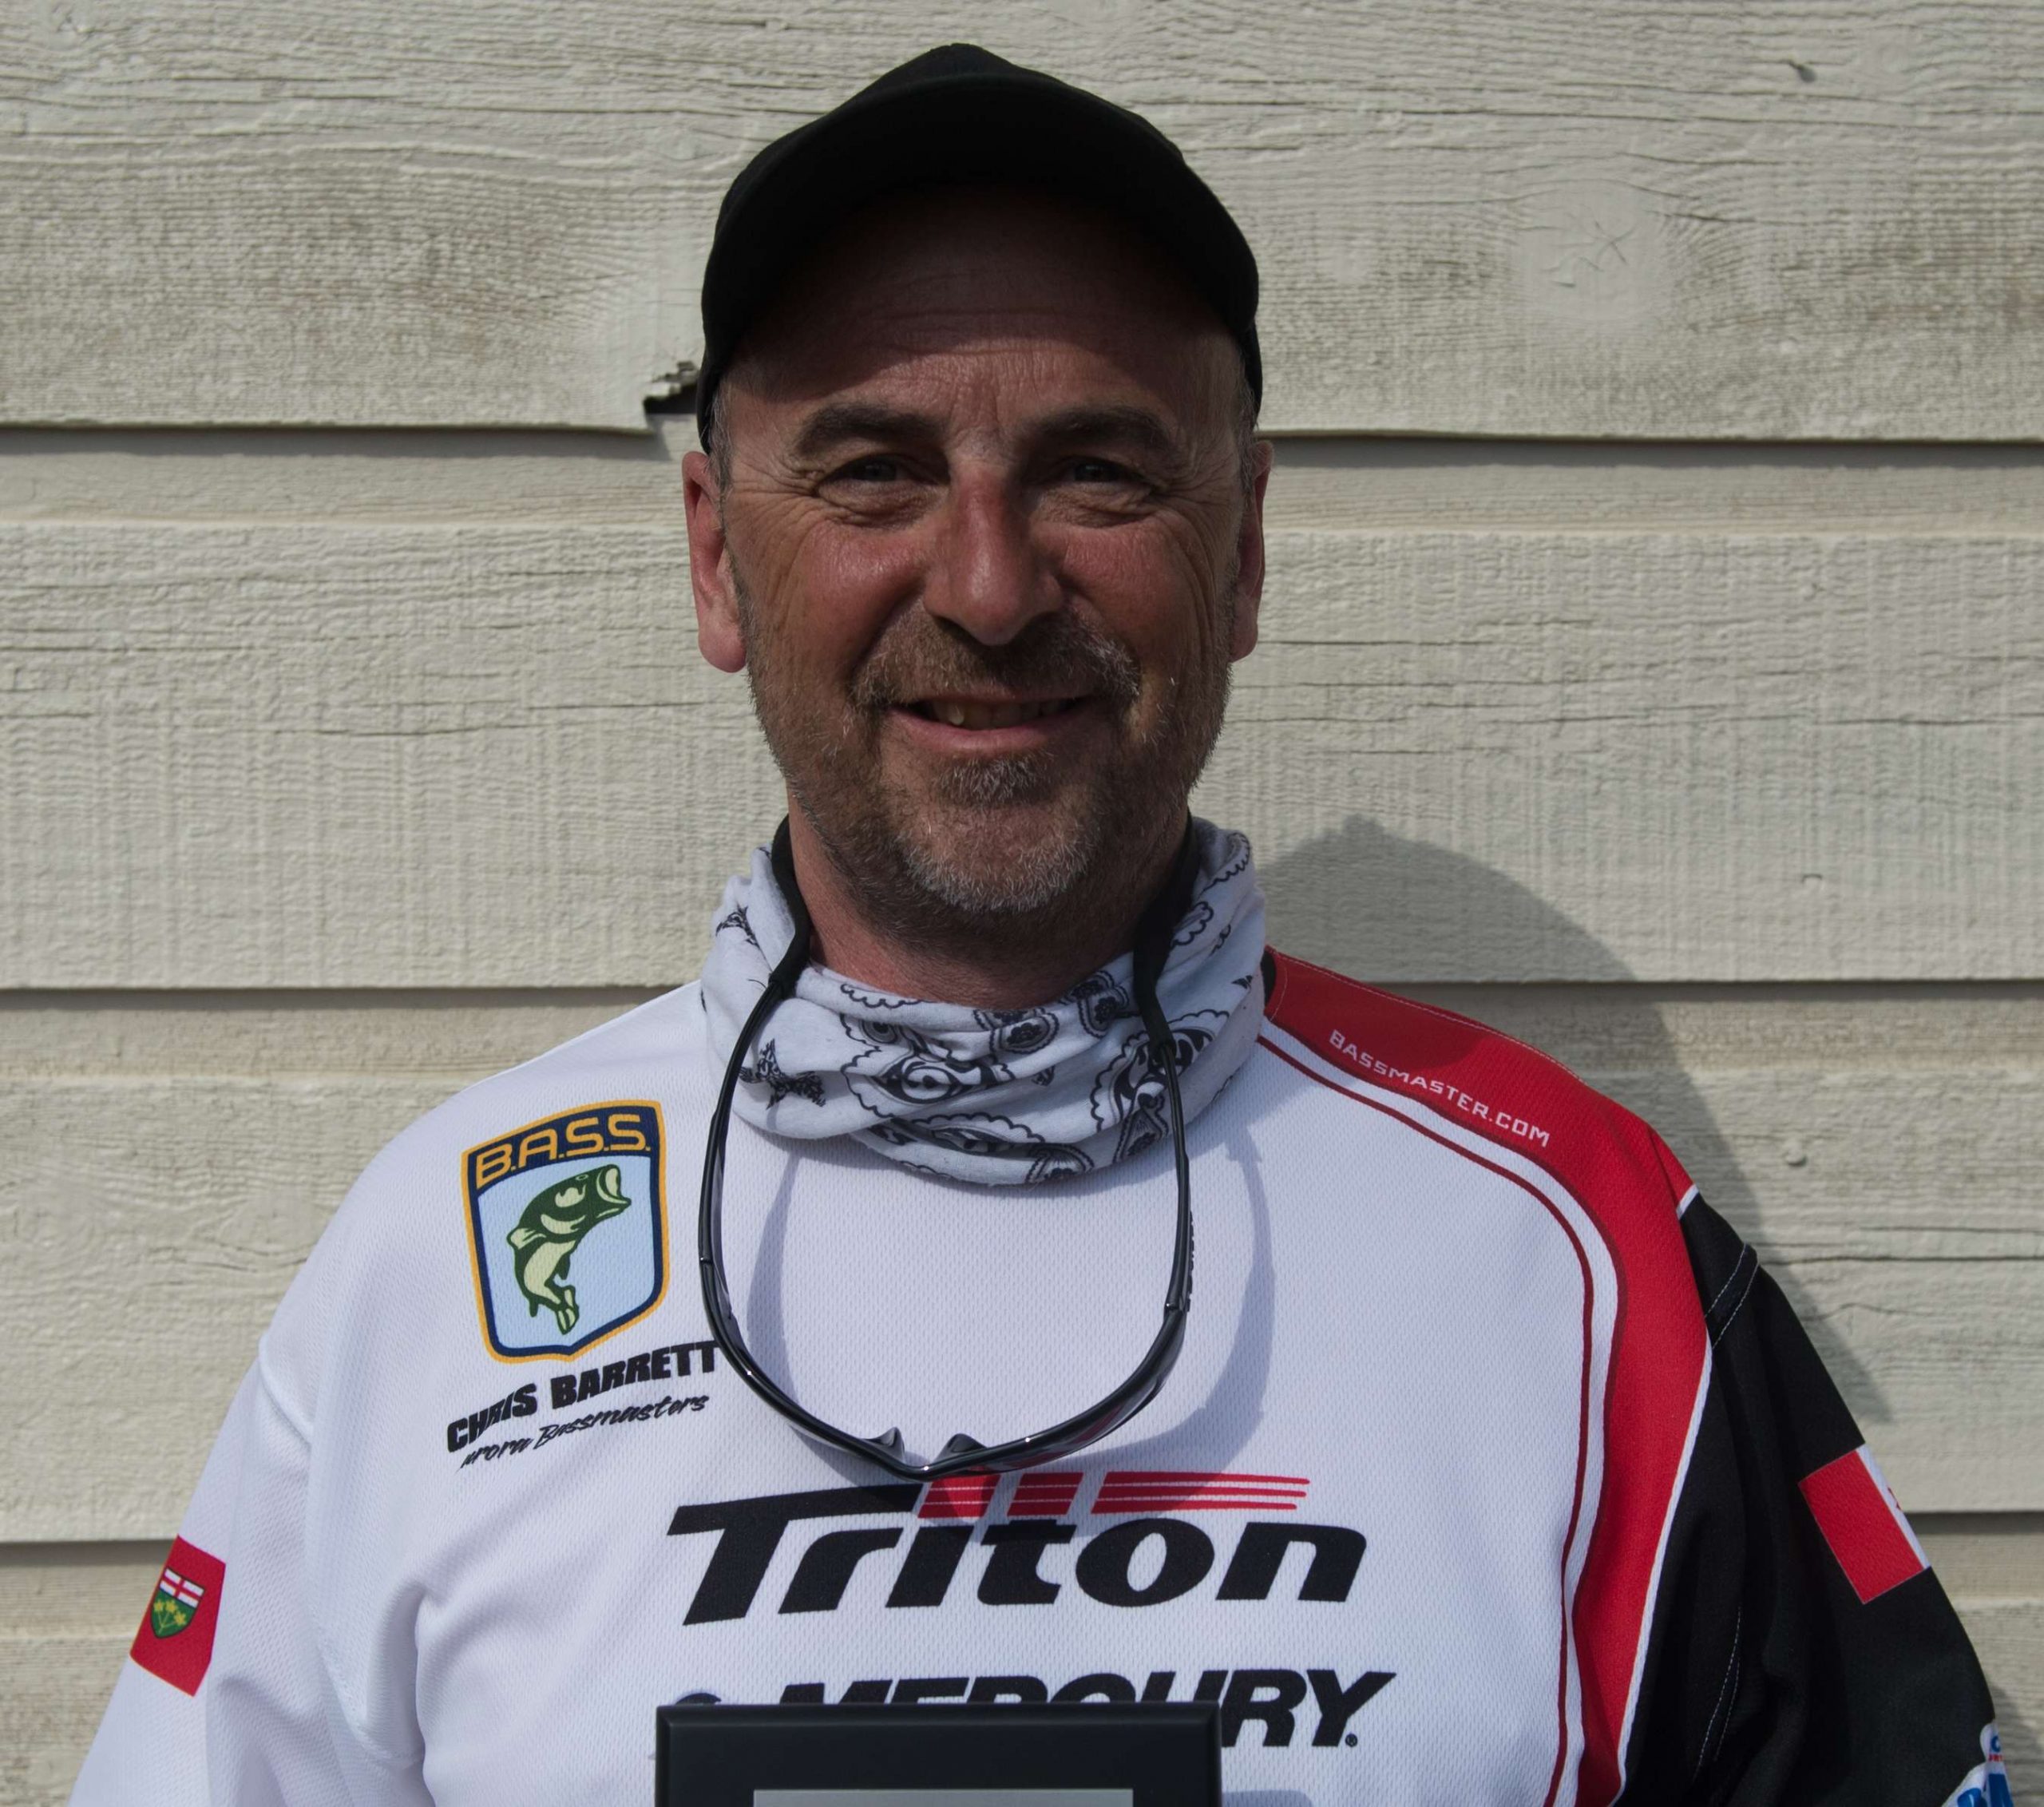 Chris Barrett <br>
Ontario Nonboater <br>
Chris Barrett of Ontario likes putting rounds of golf, playing hockey and snowboarding in Ontario. He is a municipal inspector, and the Aurora Bassmasters member will be fishing his first championship. His sponsors include Lowrance, Mercury, MotorGuide, Vigor Glasses, Ultra Tungsten, Live Target and Triton Boats. 